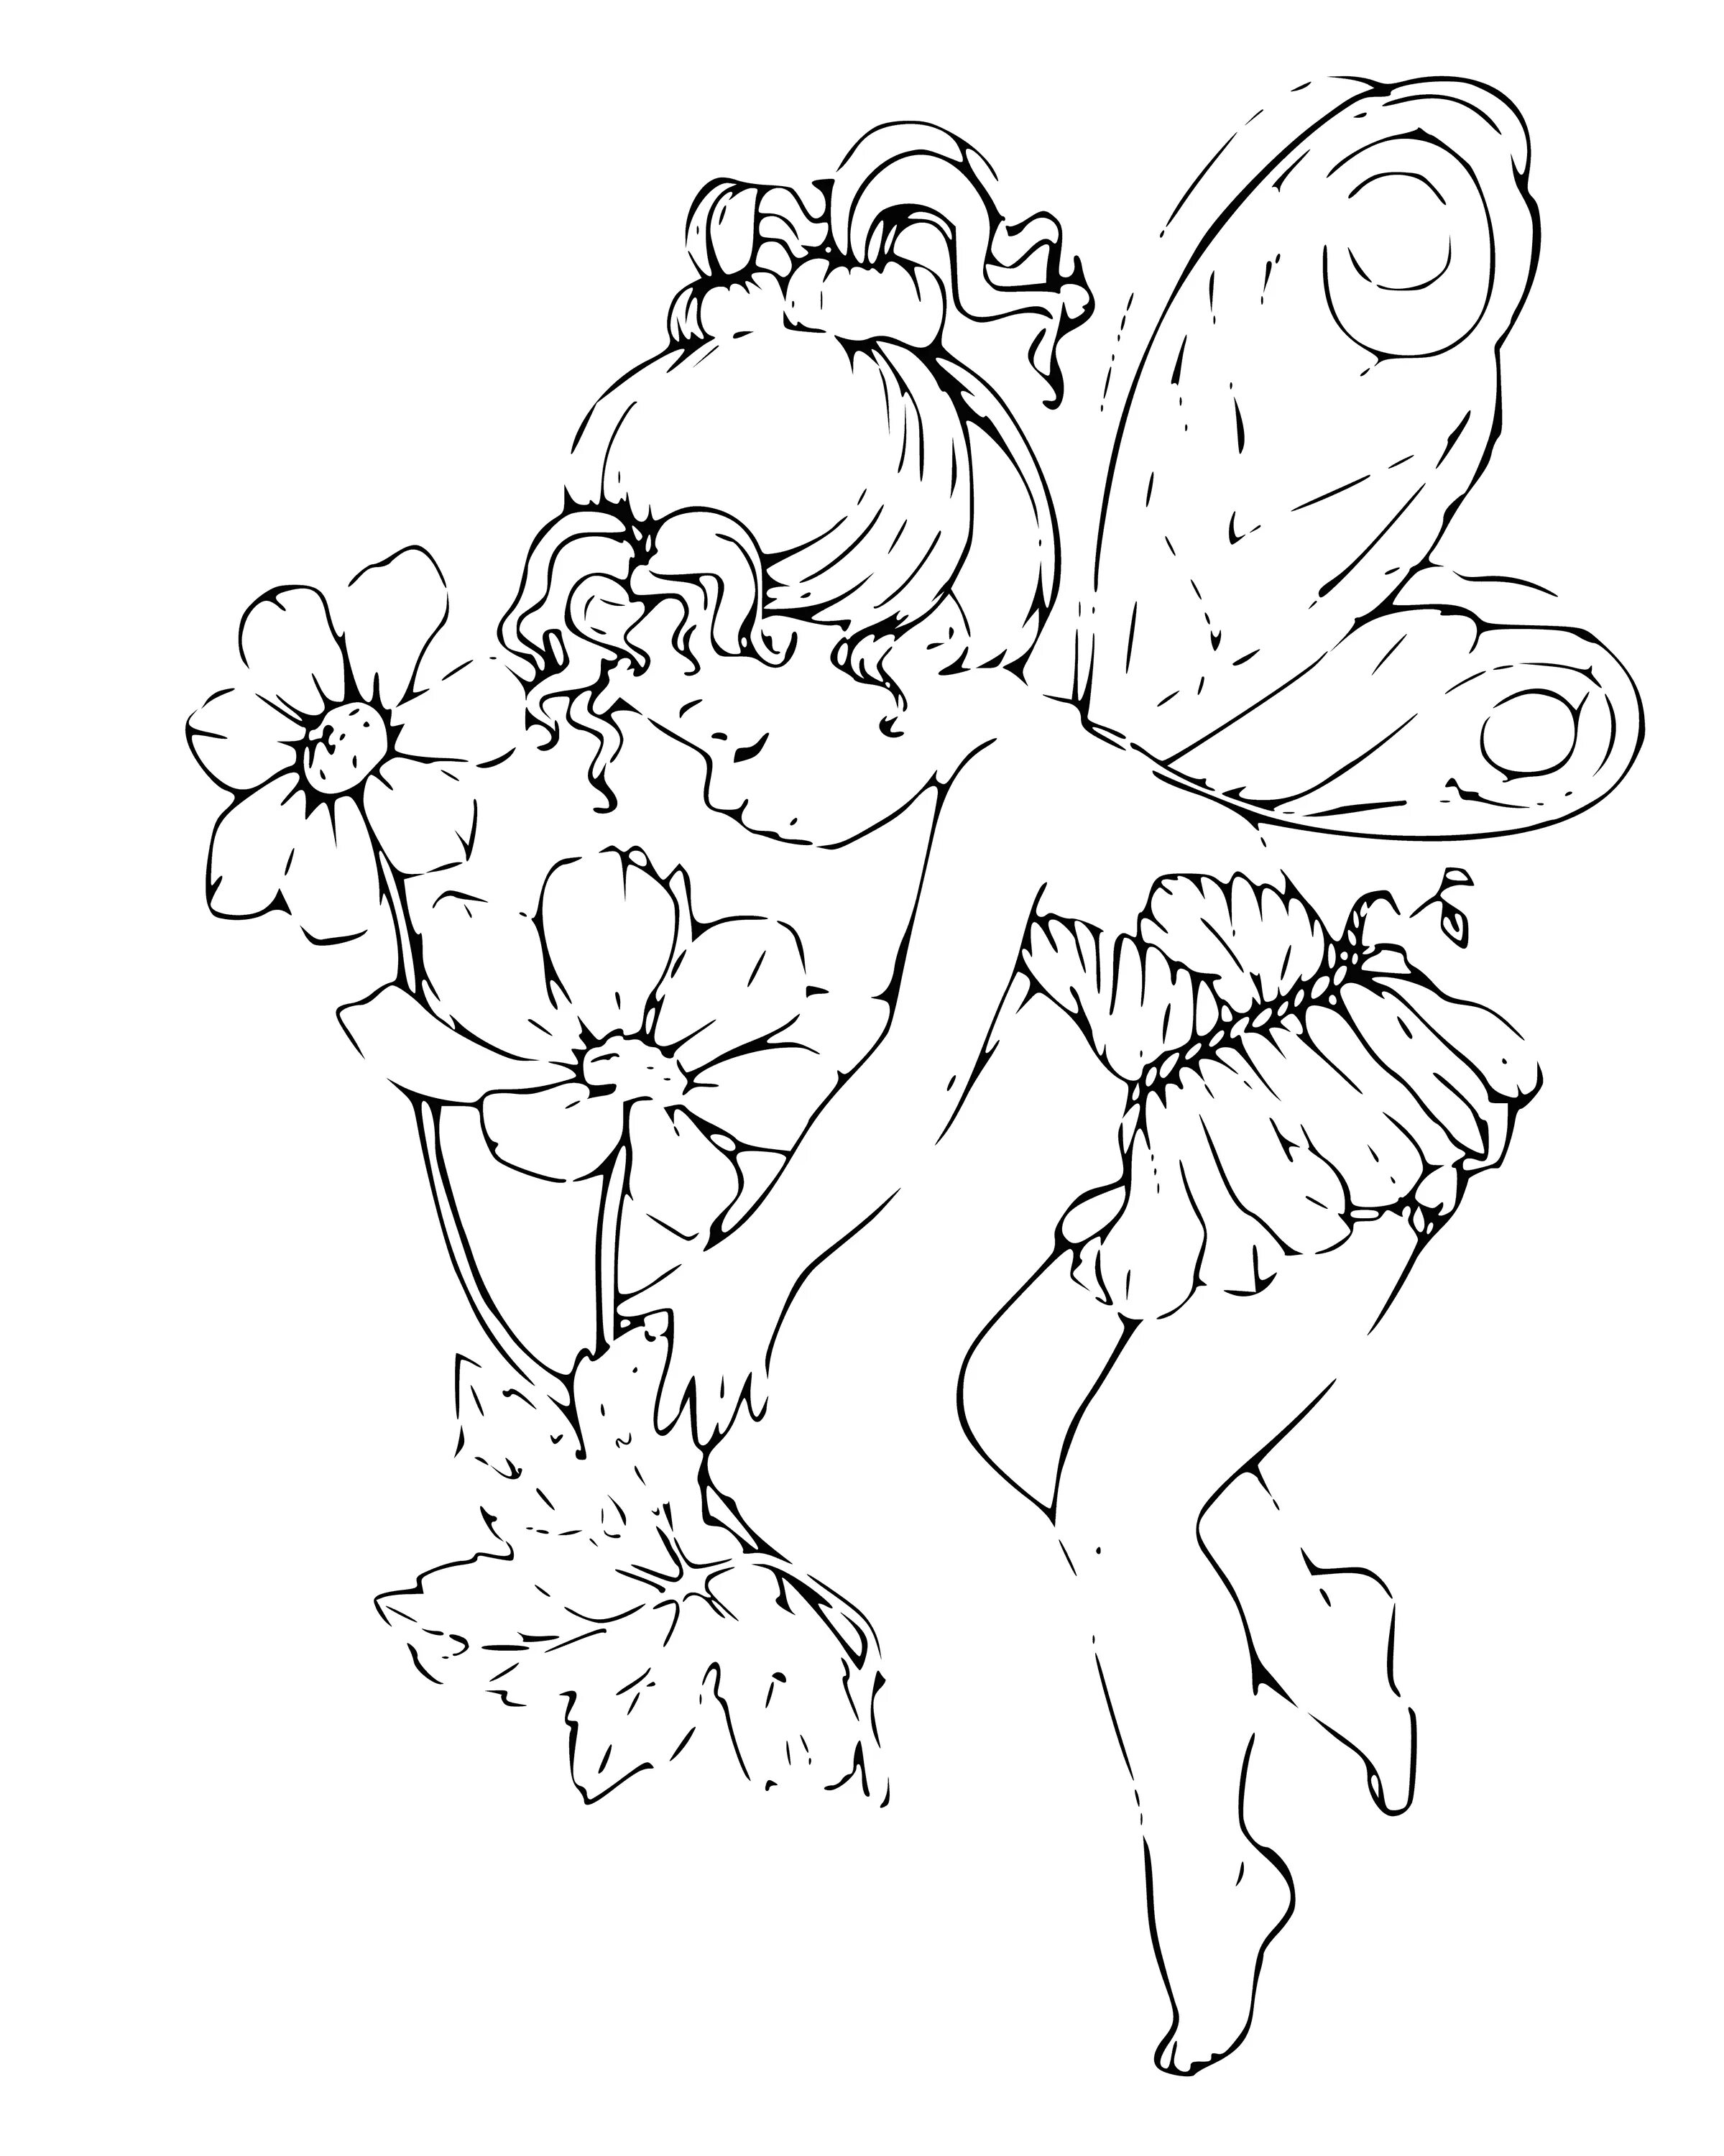 Exalted forest fairy coloring page